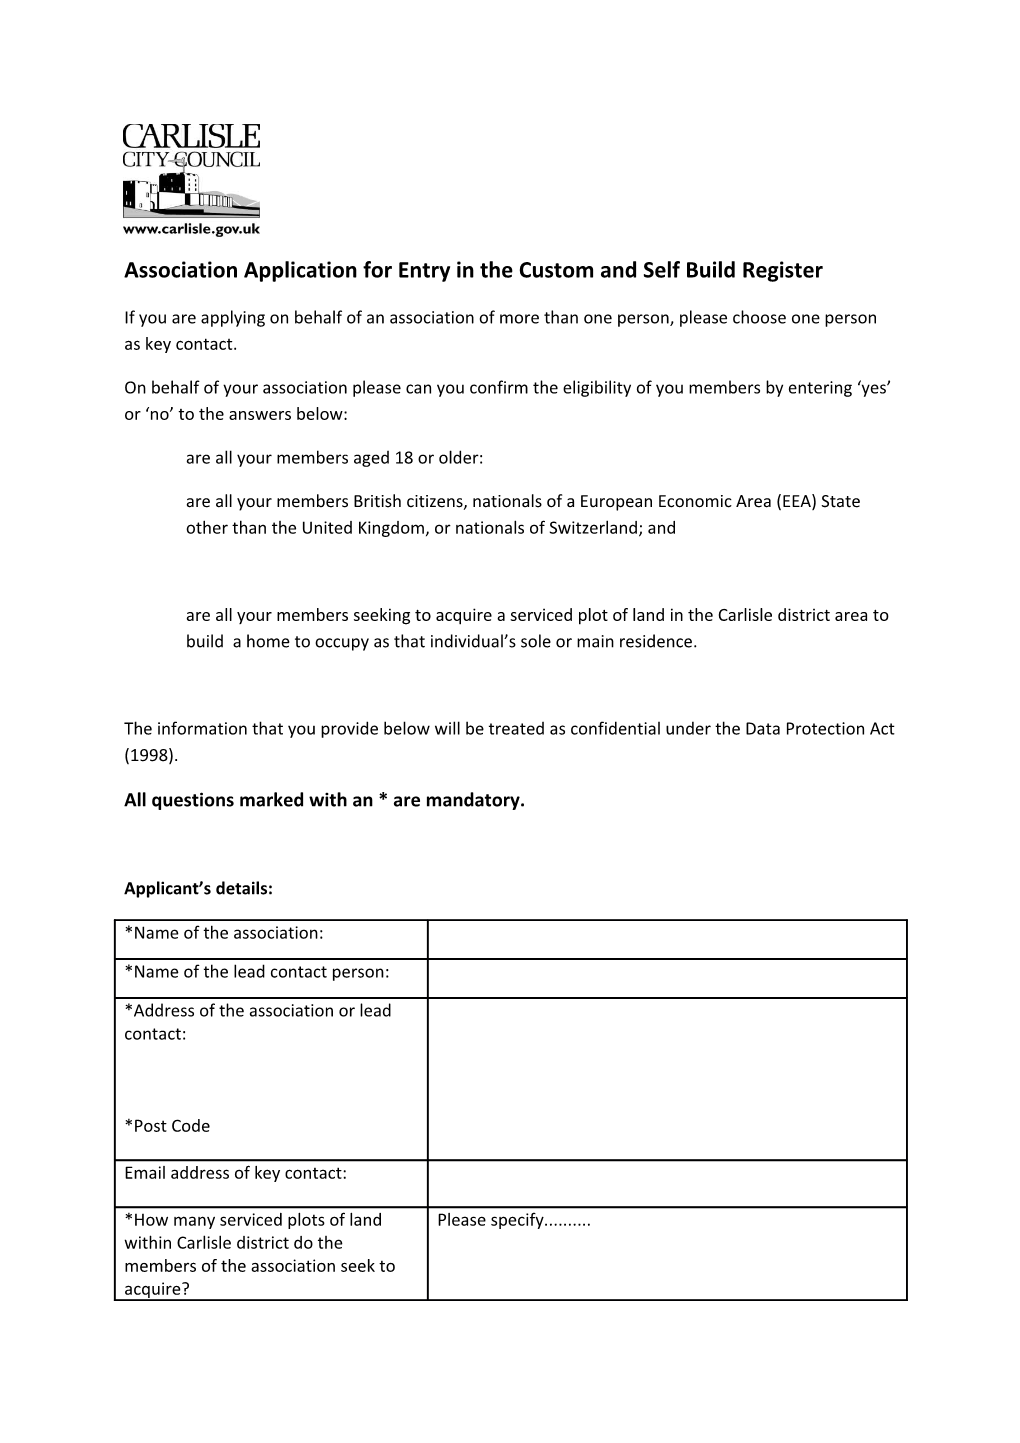 Association Application for Entry in the Custom and Self Build Register